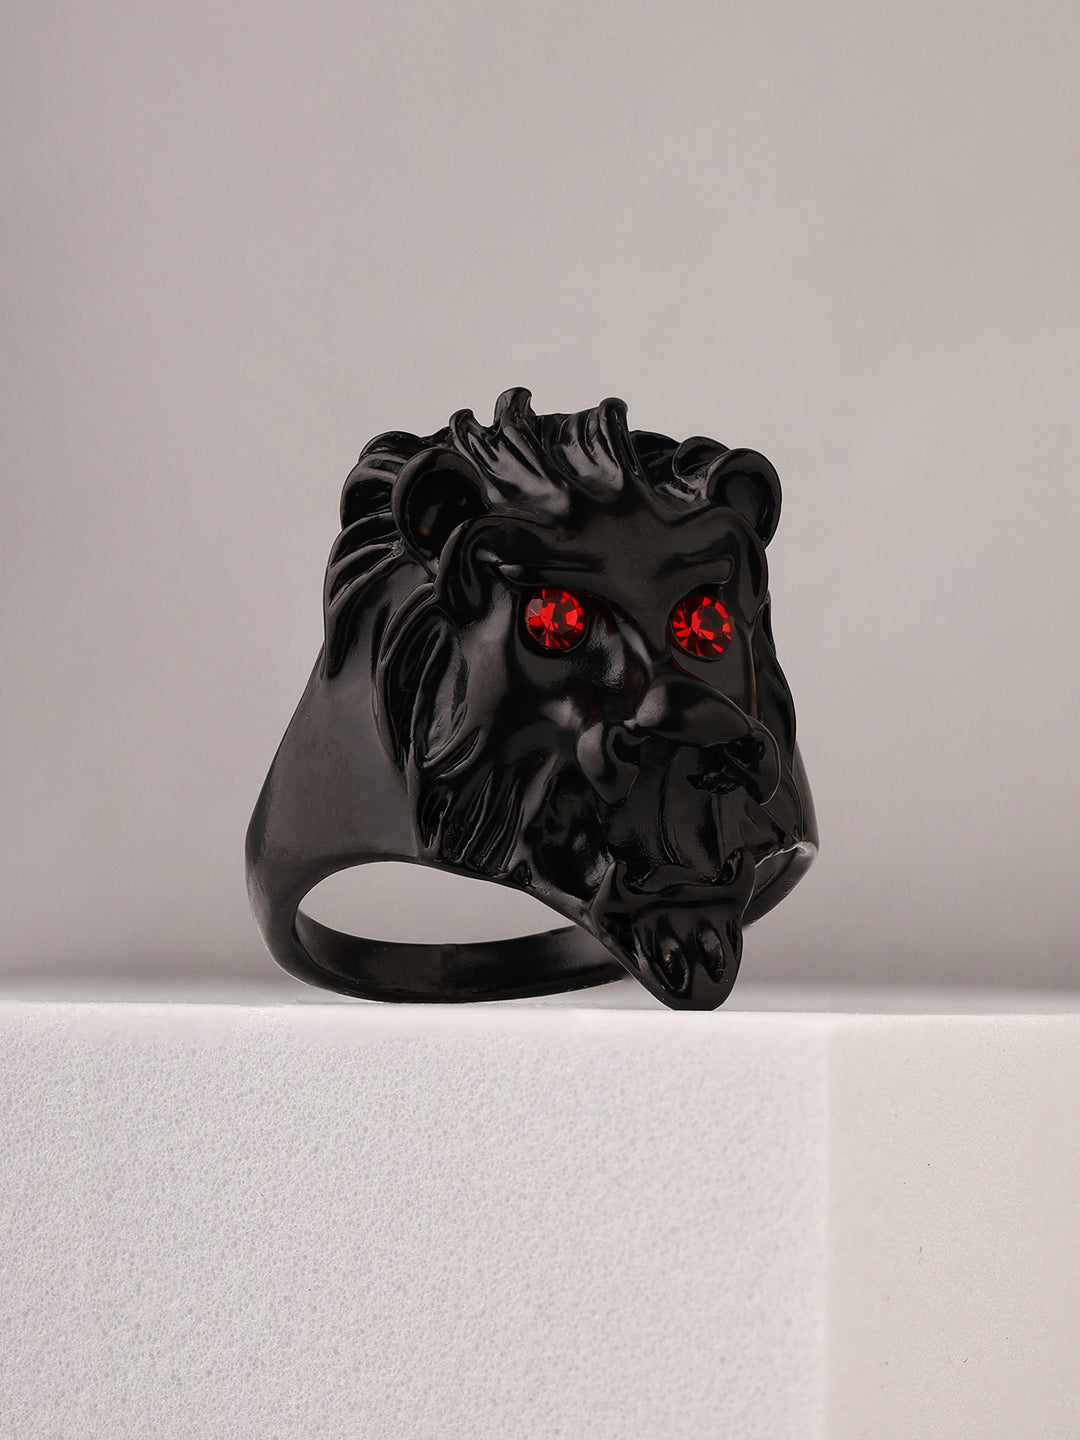 Bold by Priyaasi A Stunning Fusion of Men's Ring with Lion Face